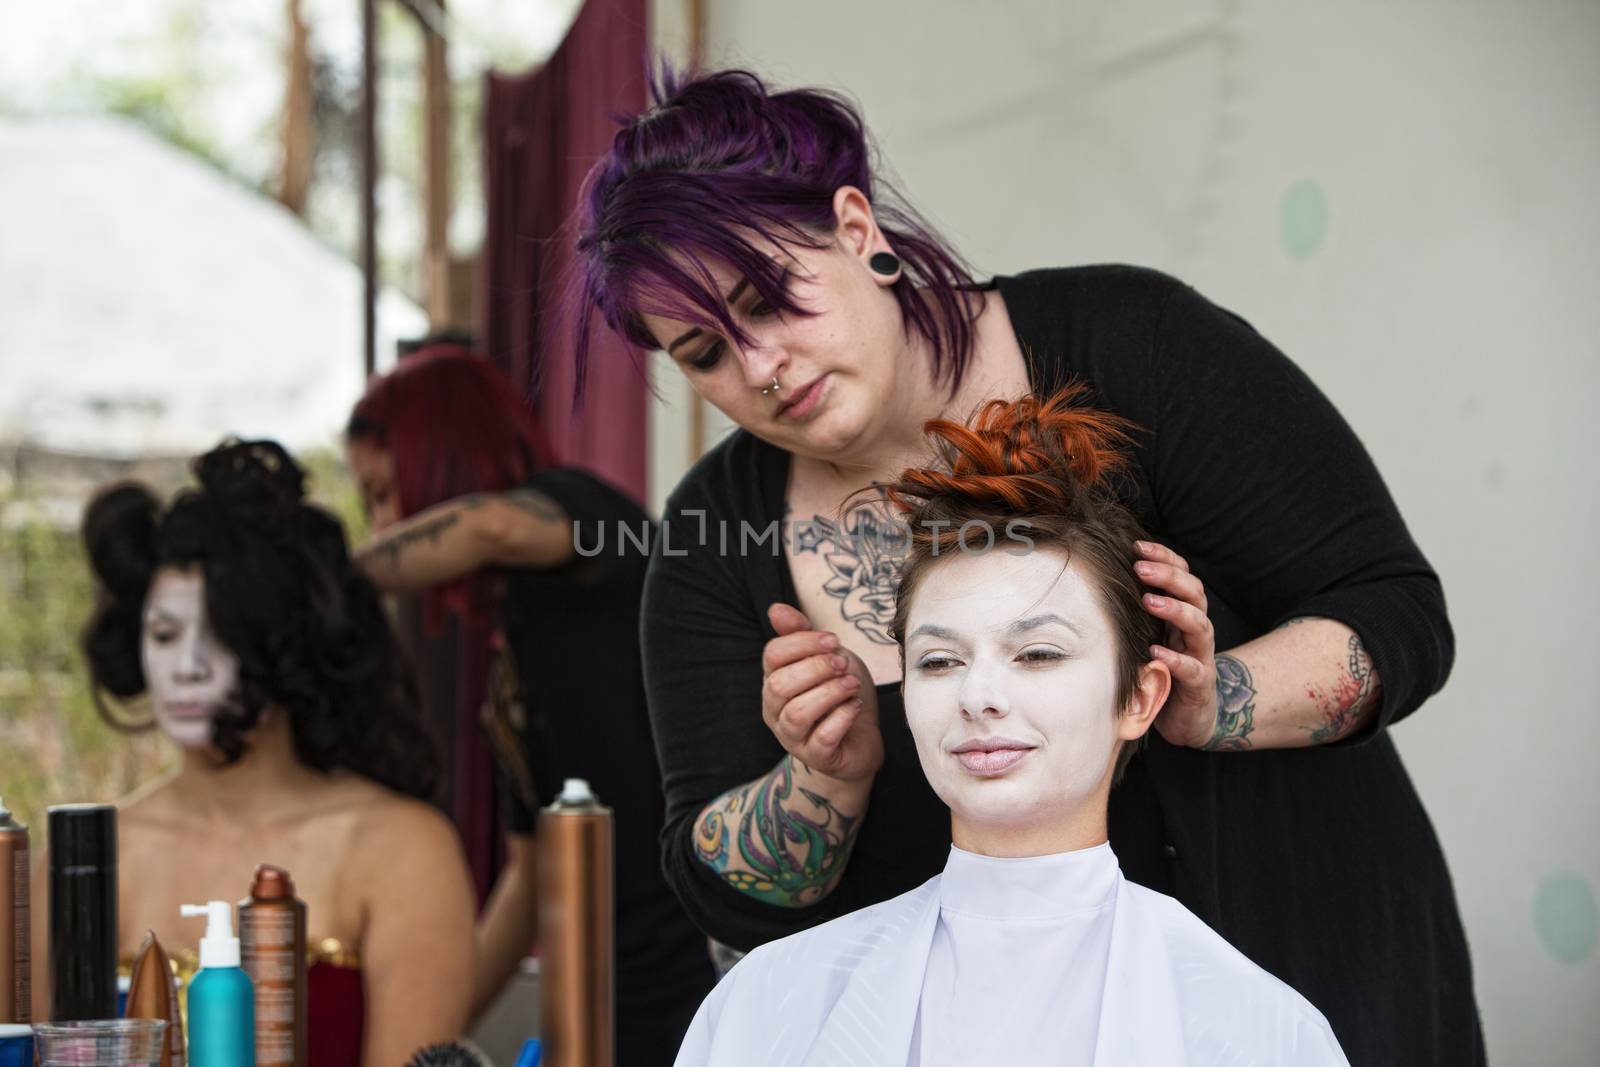 Stylist with tattoo fixing hair for woman in white makeup